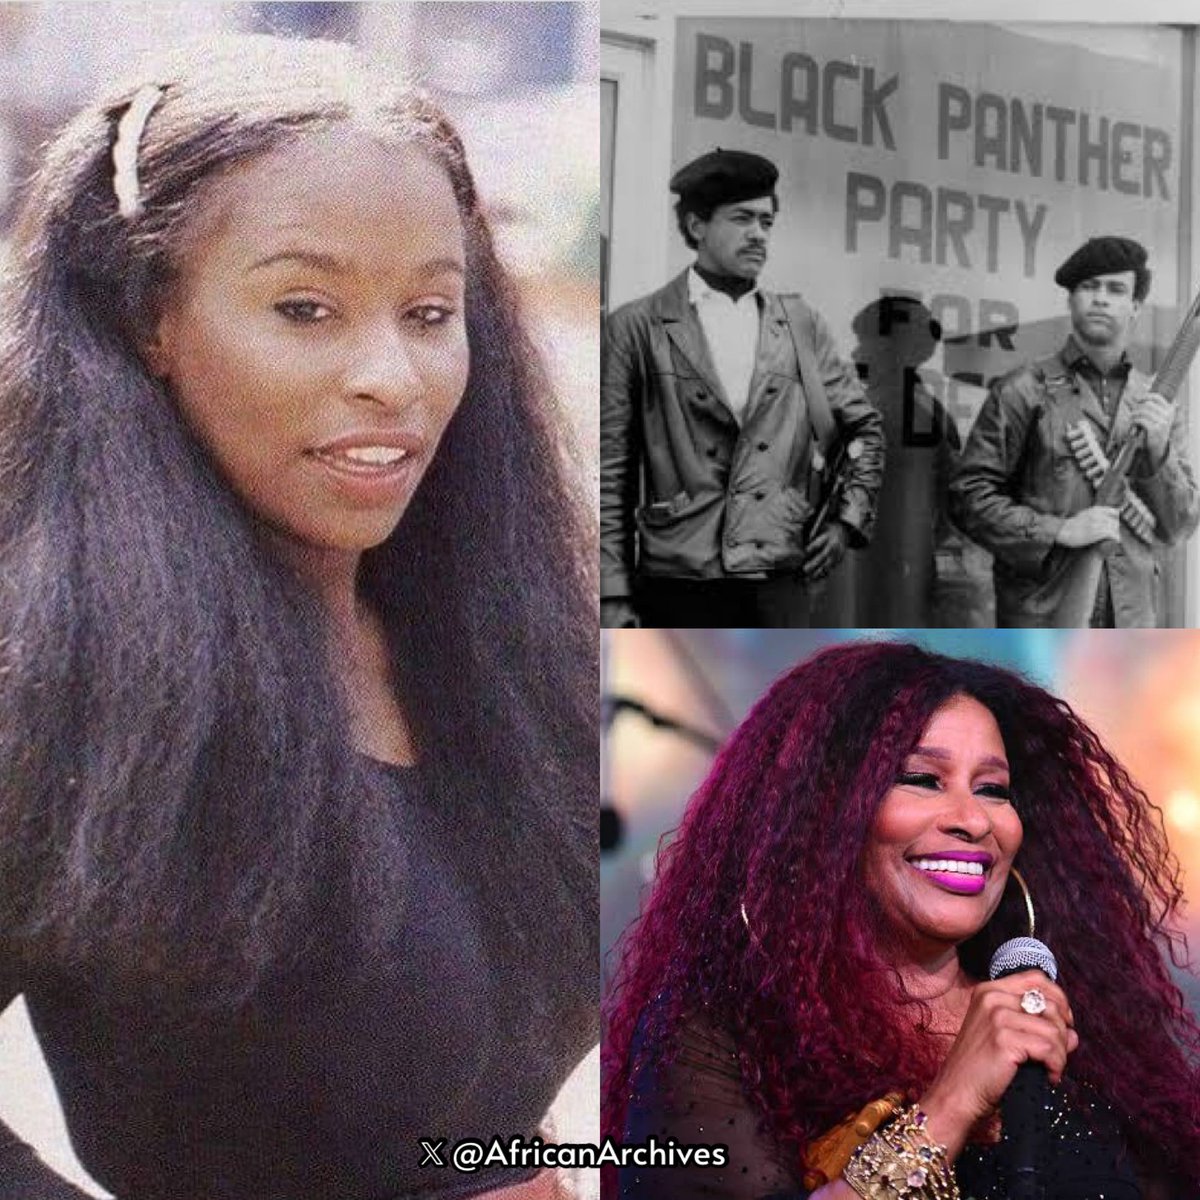 At 16, Yvette Stevens joined the Black Panther Party. She was responsible selling the Black Panther newspaper & helping start the free breakfast program for children. You might know her by another name: CHAKA KHAN! Happy 71st Birthday to Grammy Award winning singer Chaka Khan!